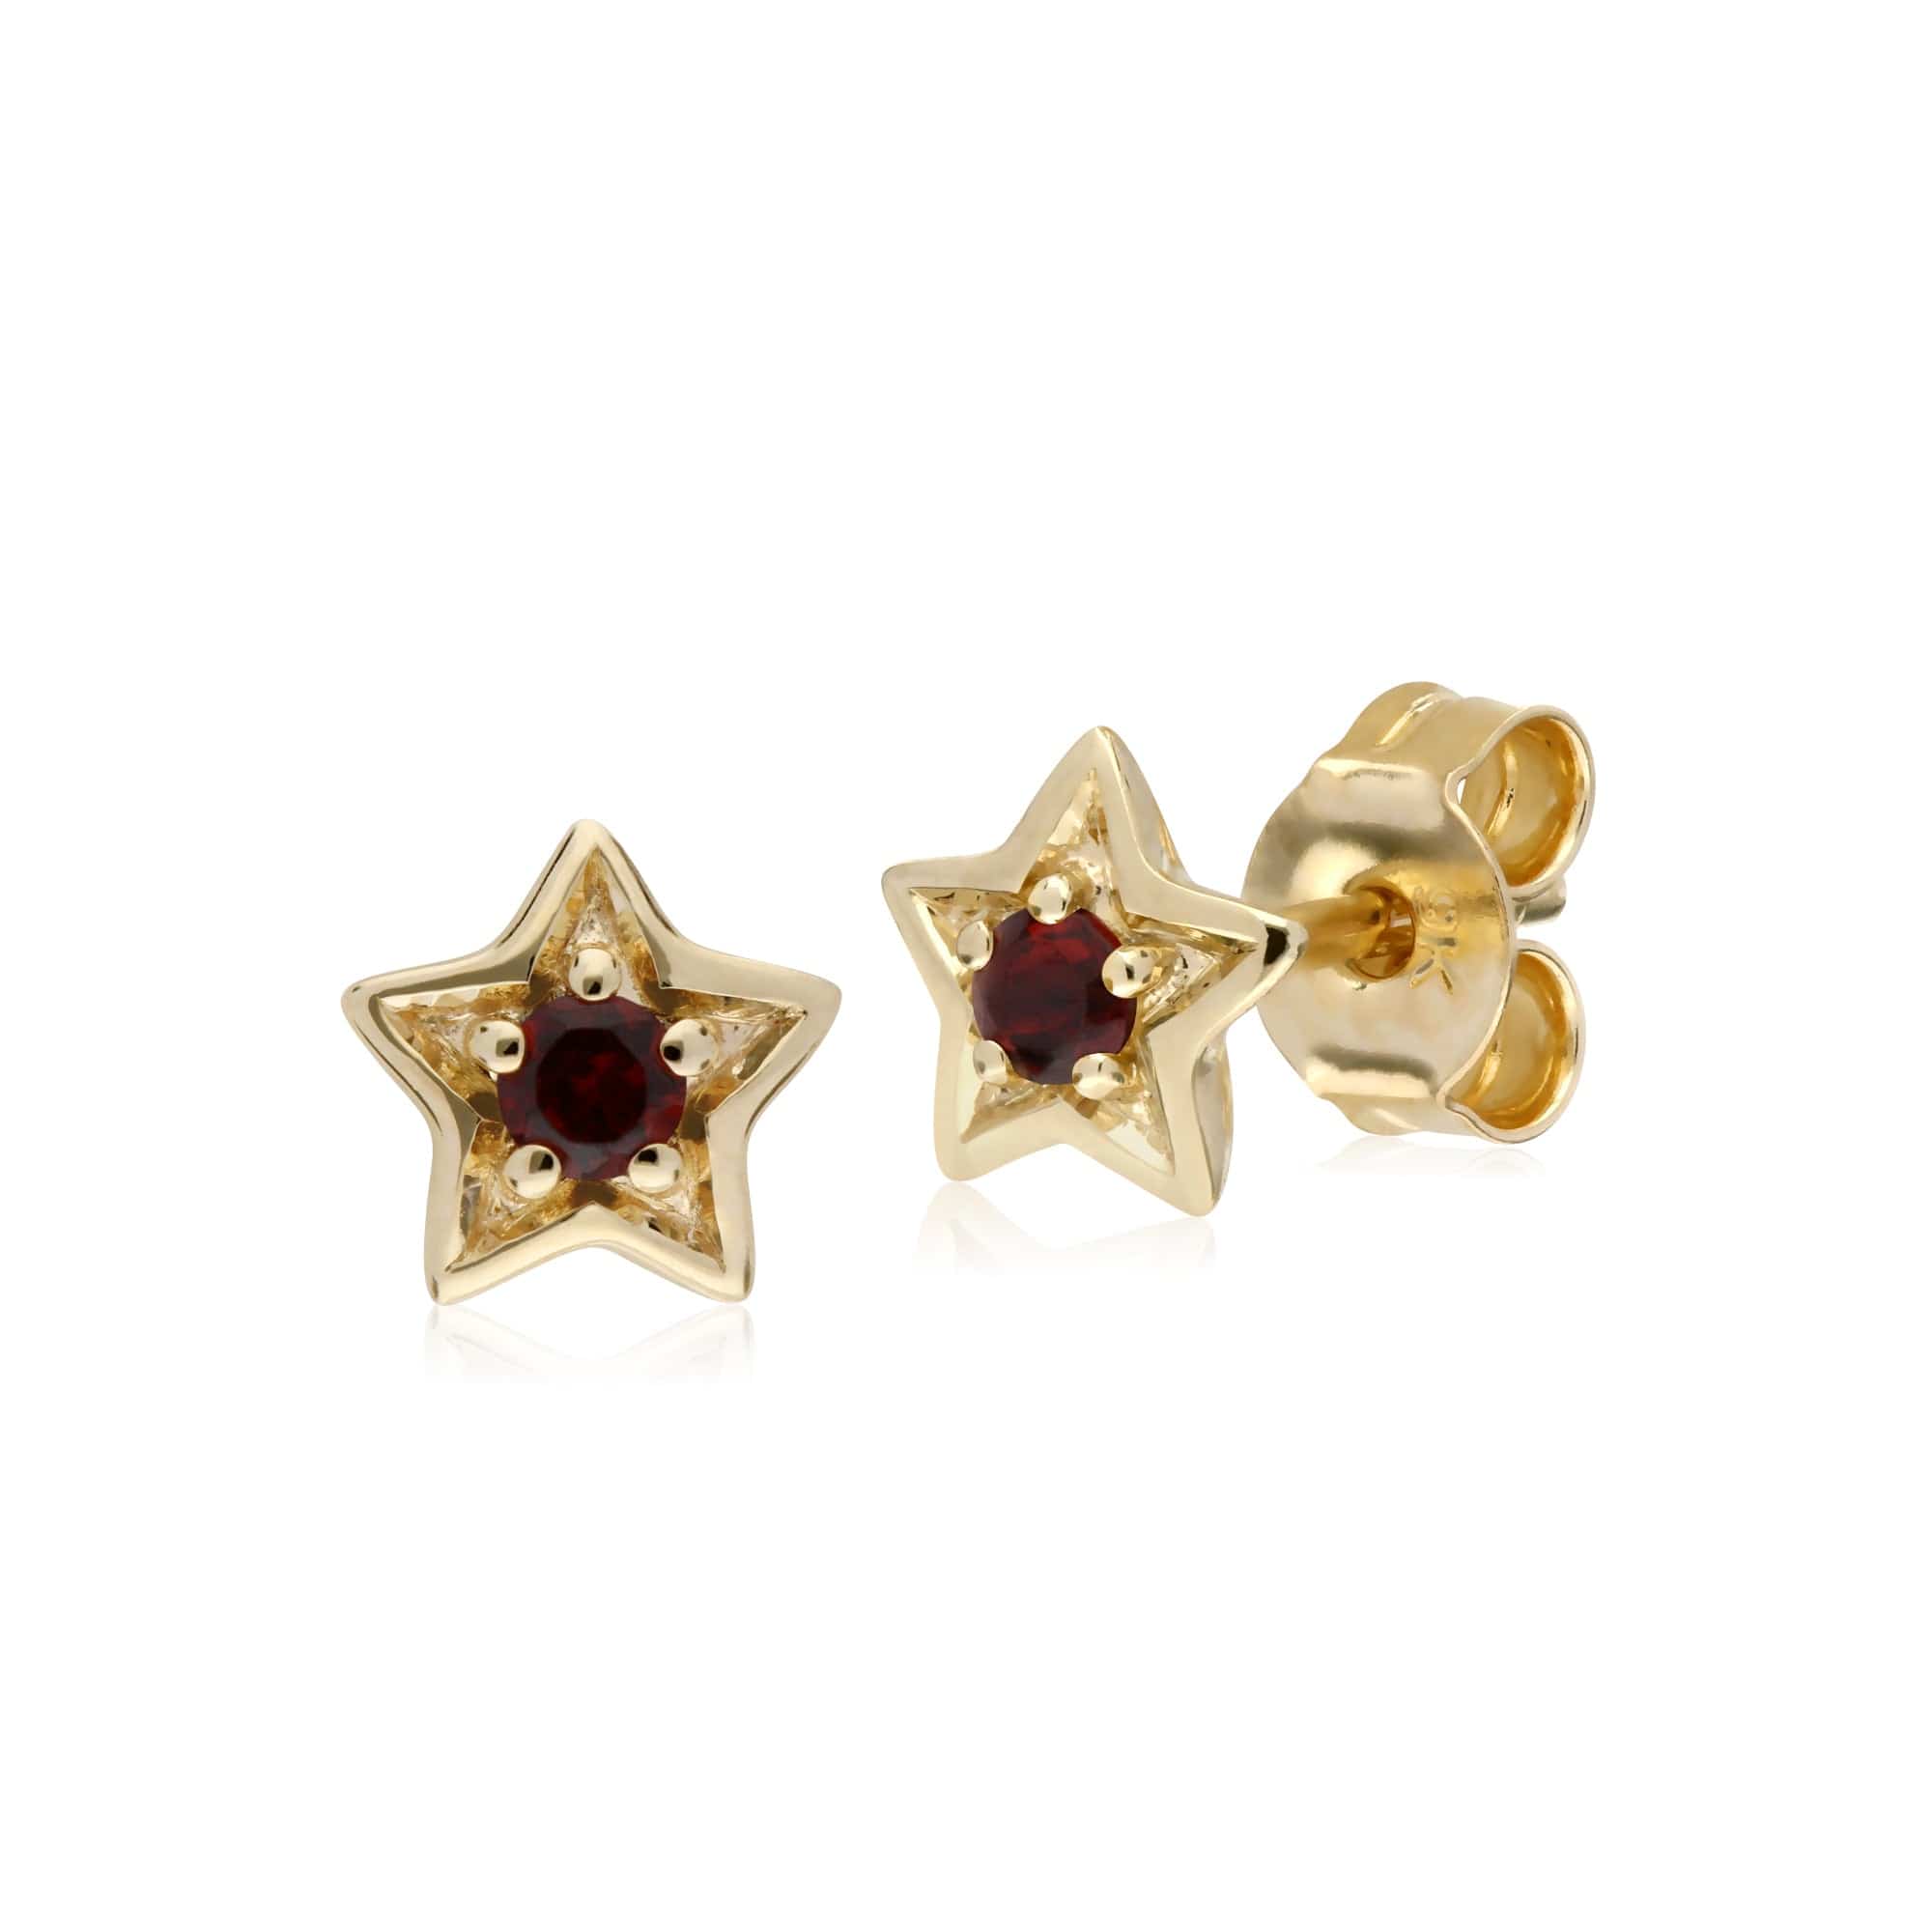 135E1523079-135P1874079 Contemporary Round Garnet Single Stone Star Earrings & Necklace Set in 9ct Yellow Gold 2